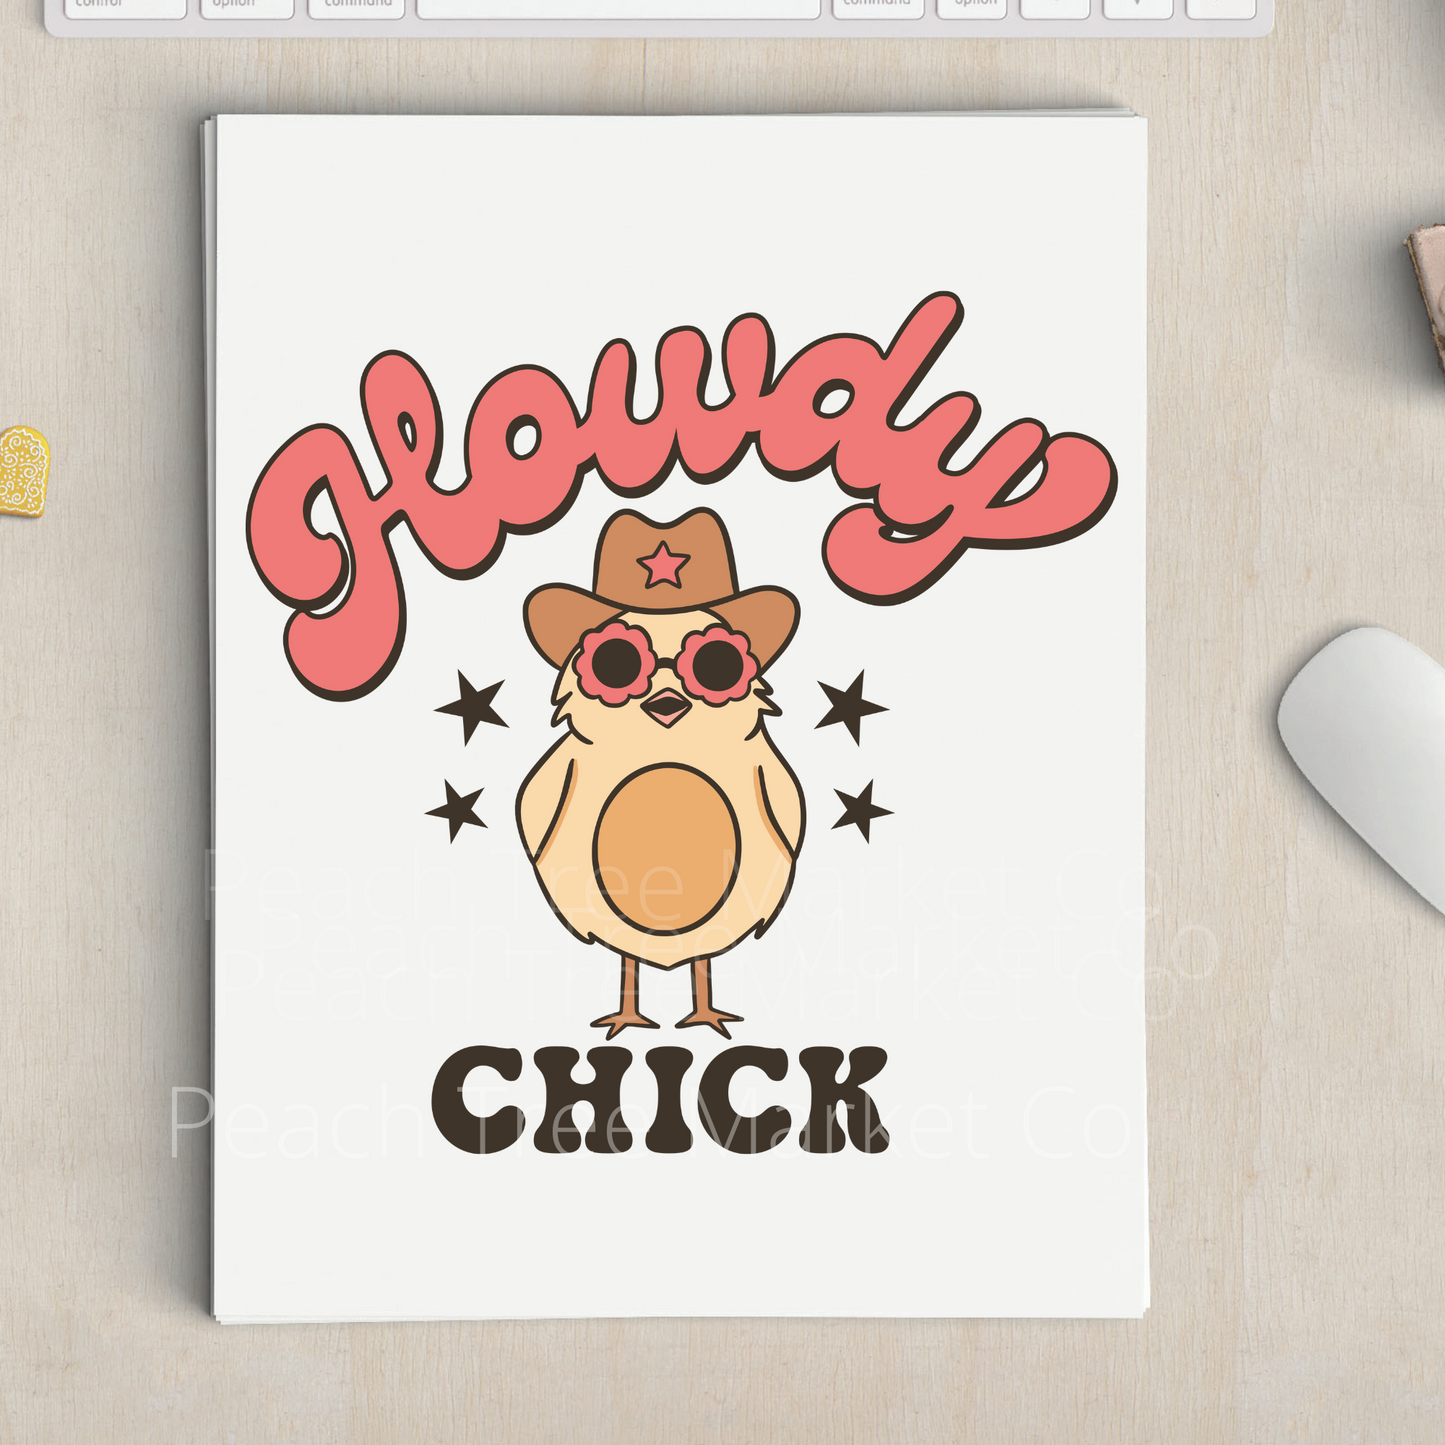 Howdy Chick Sublimation Transfer